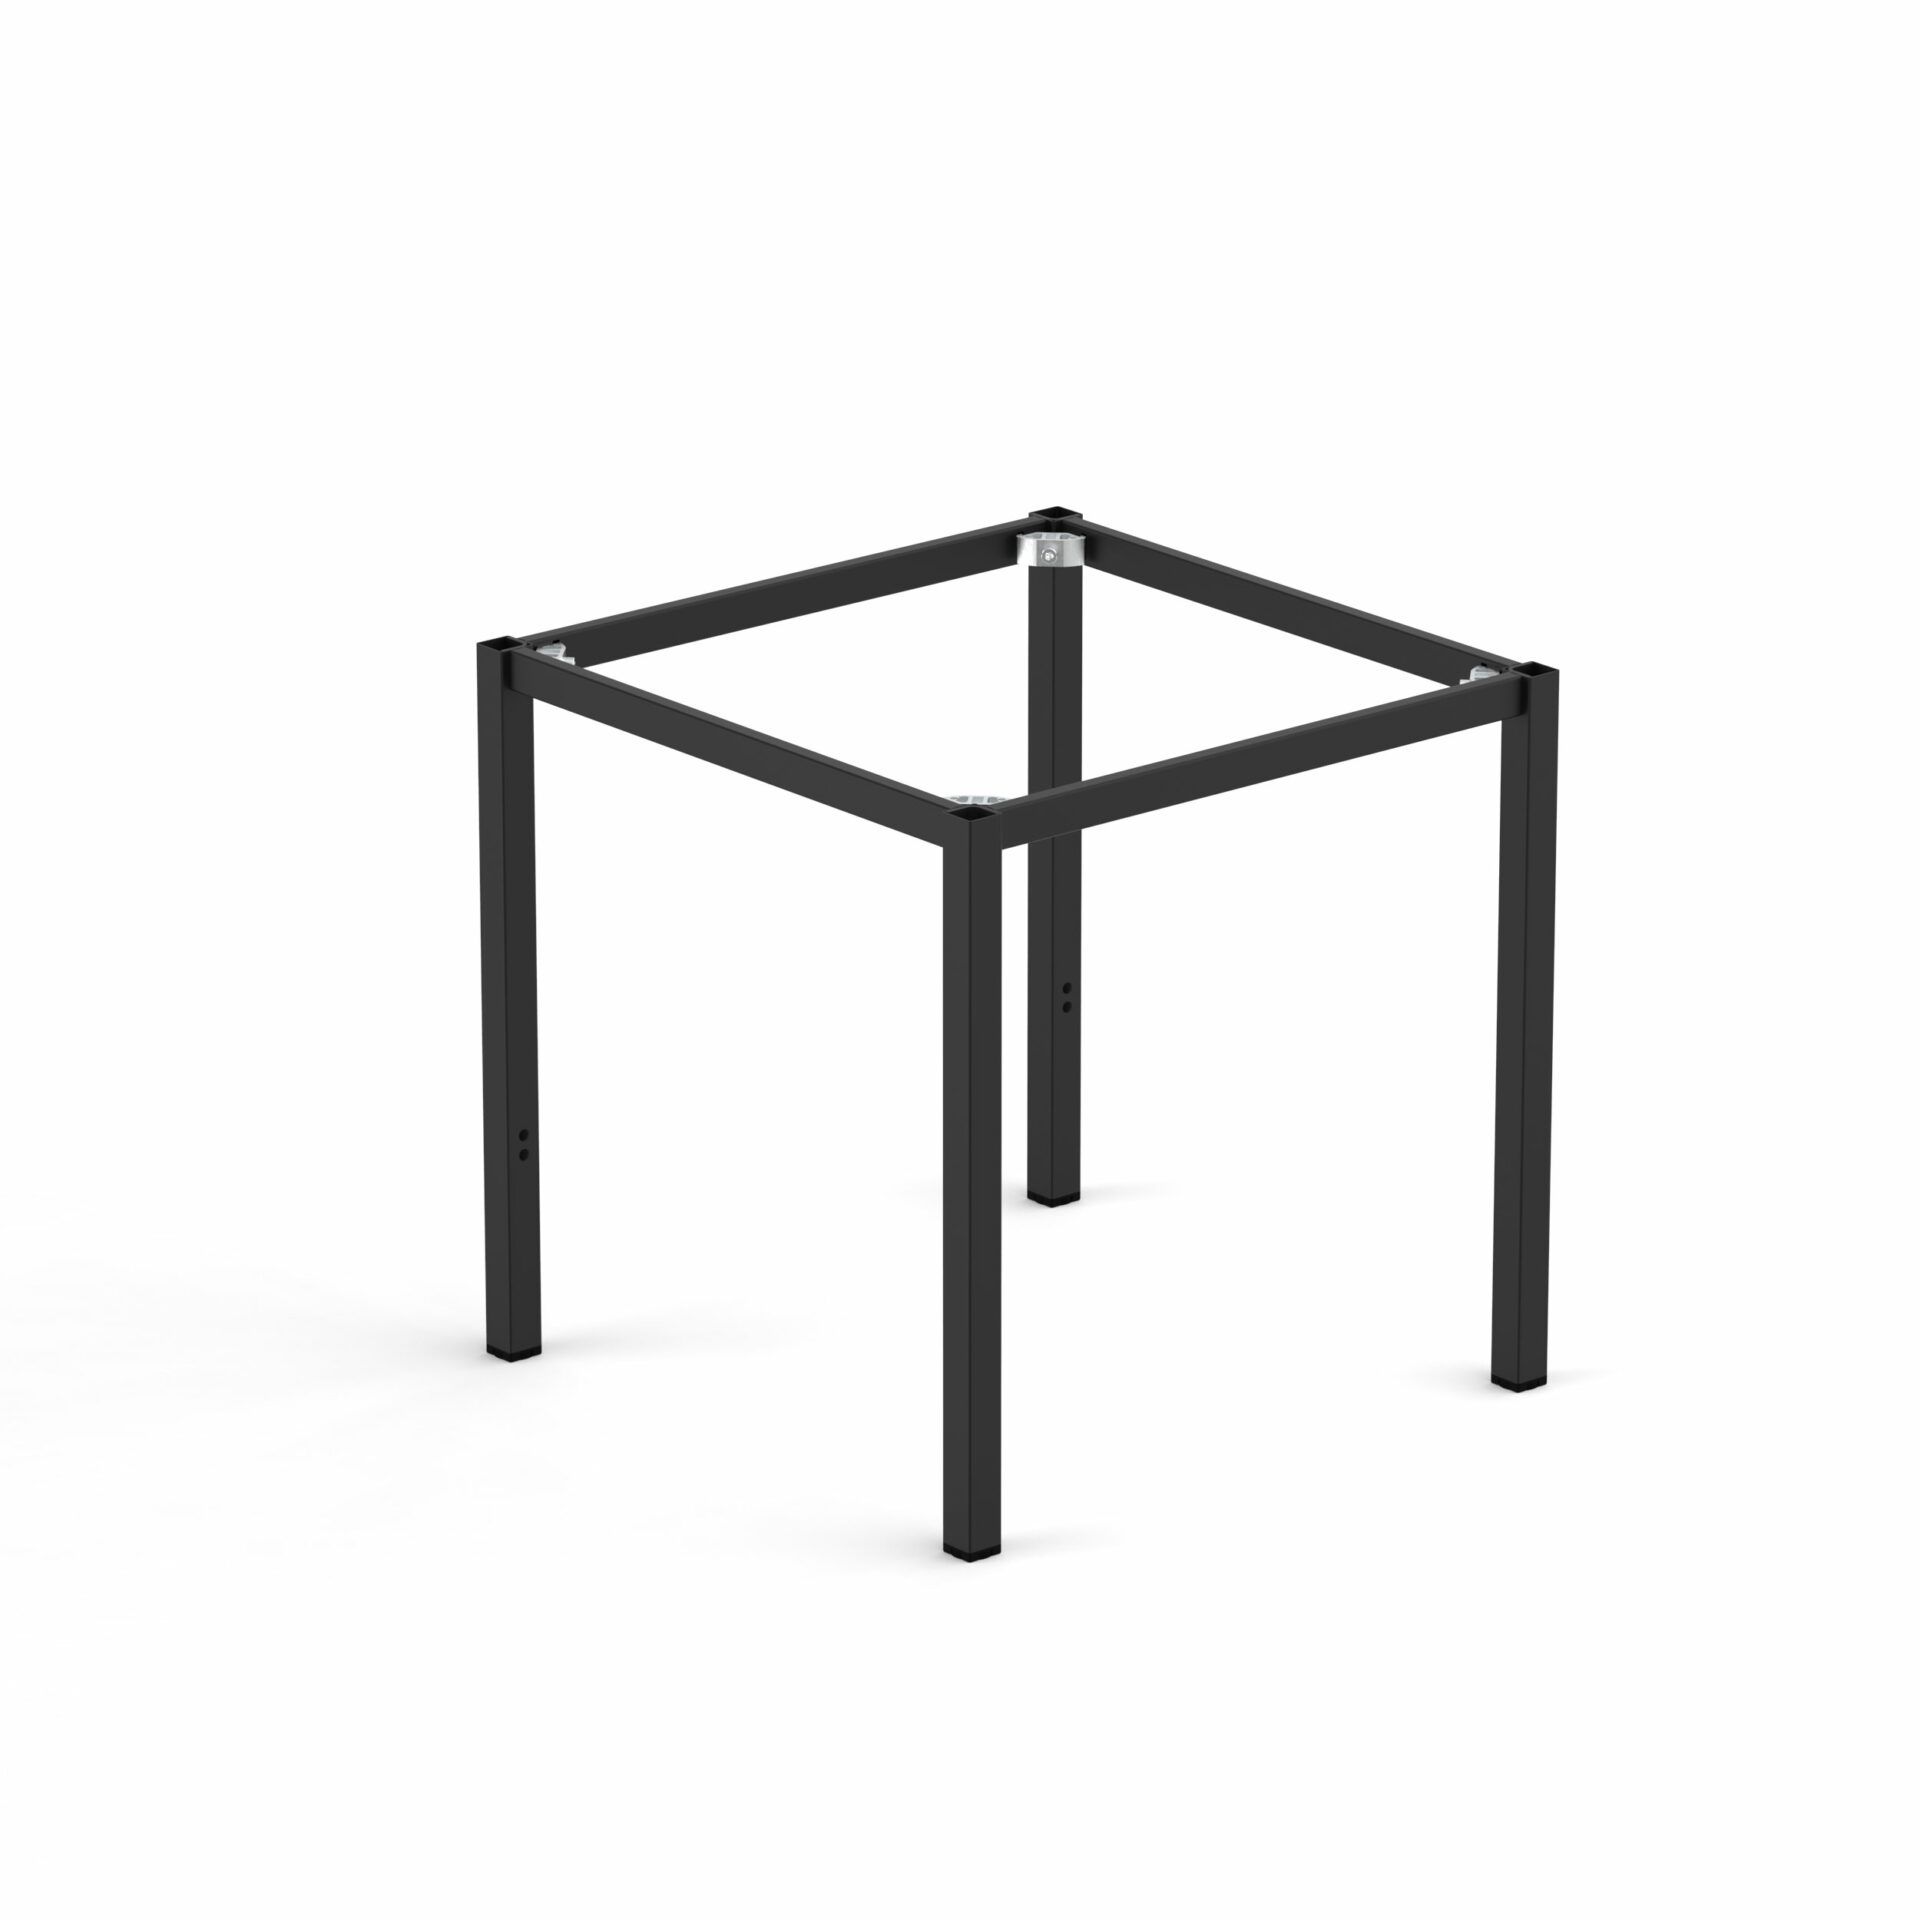 Spire Square leg Table Height Frame 790 x 790 x 720H